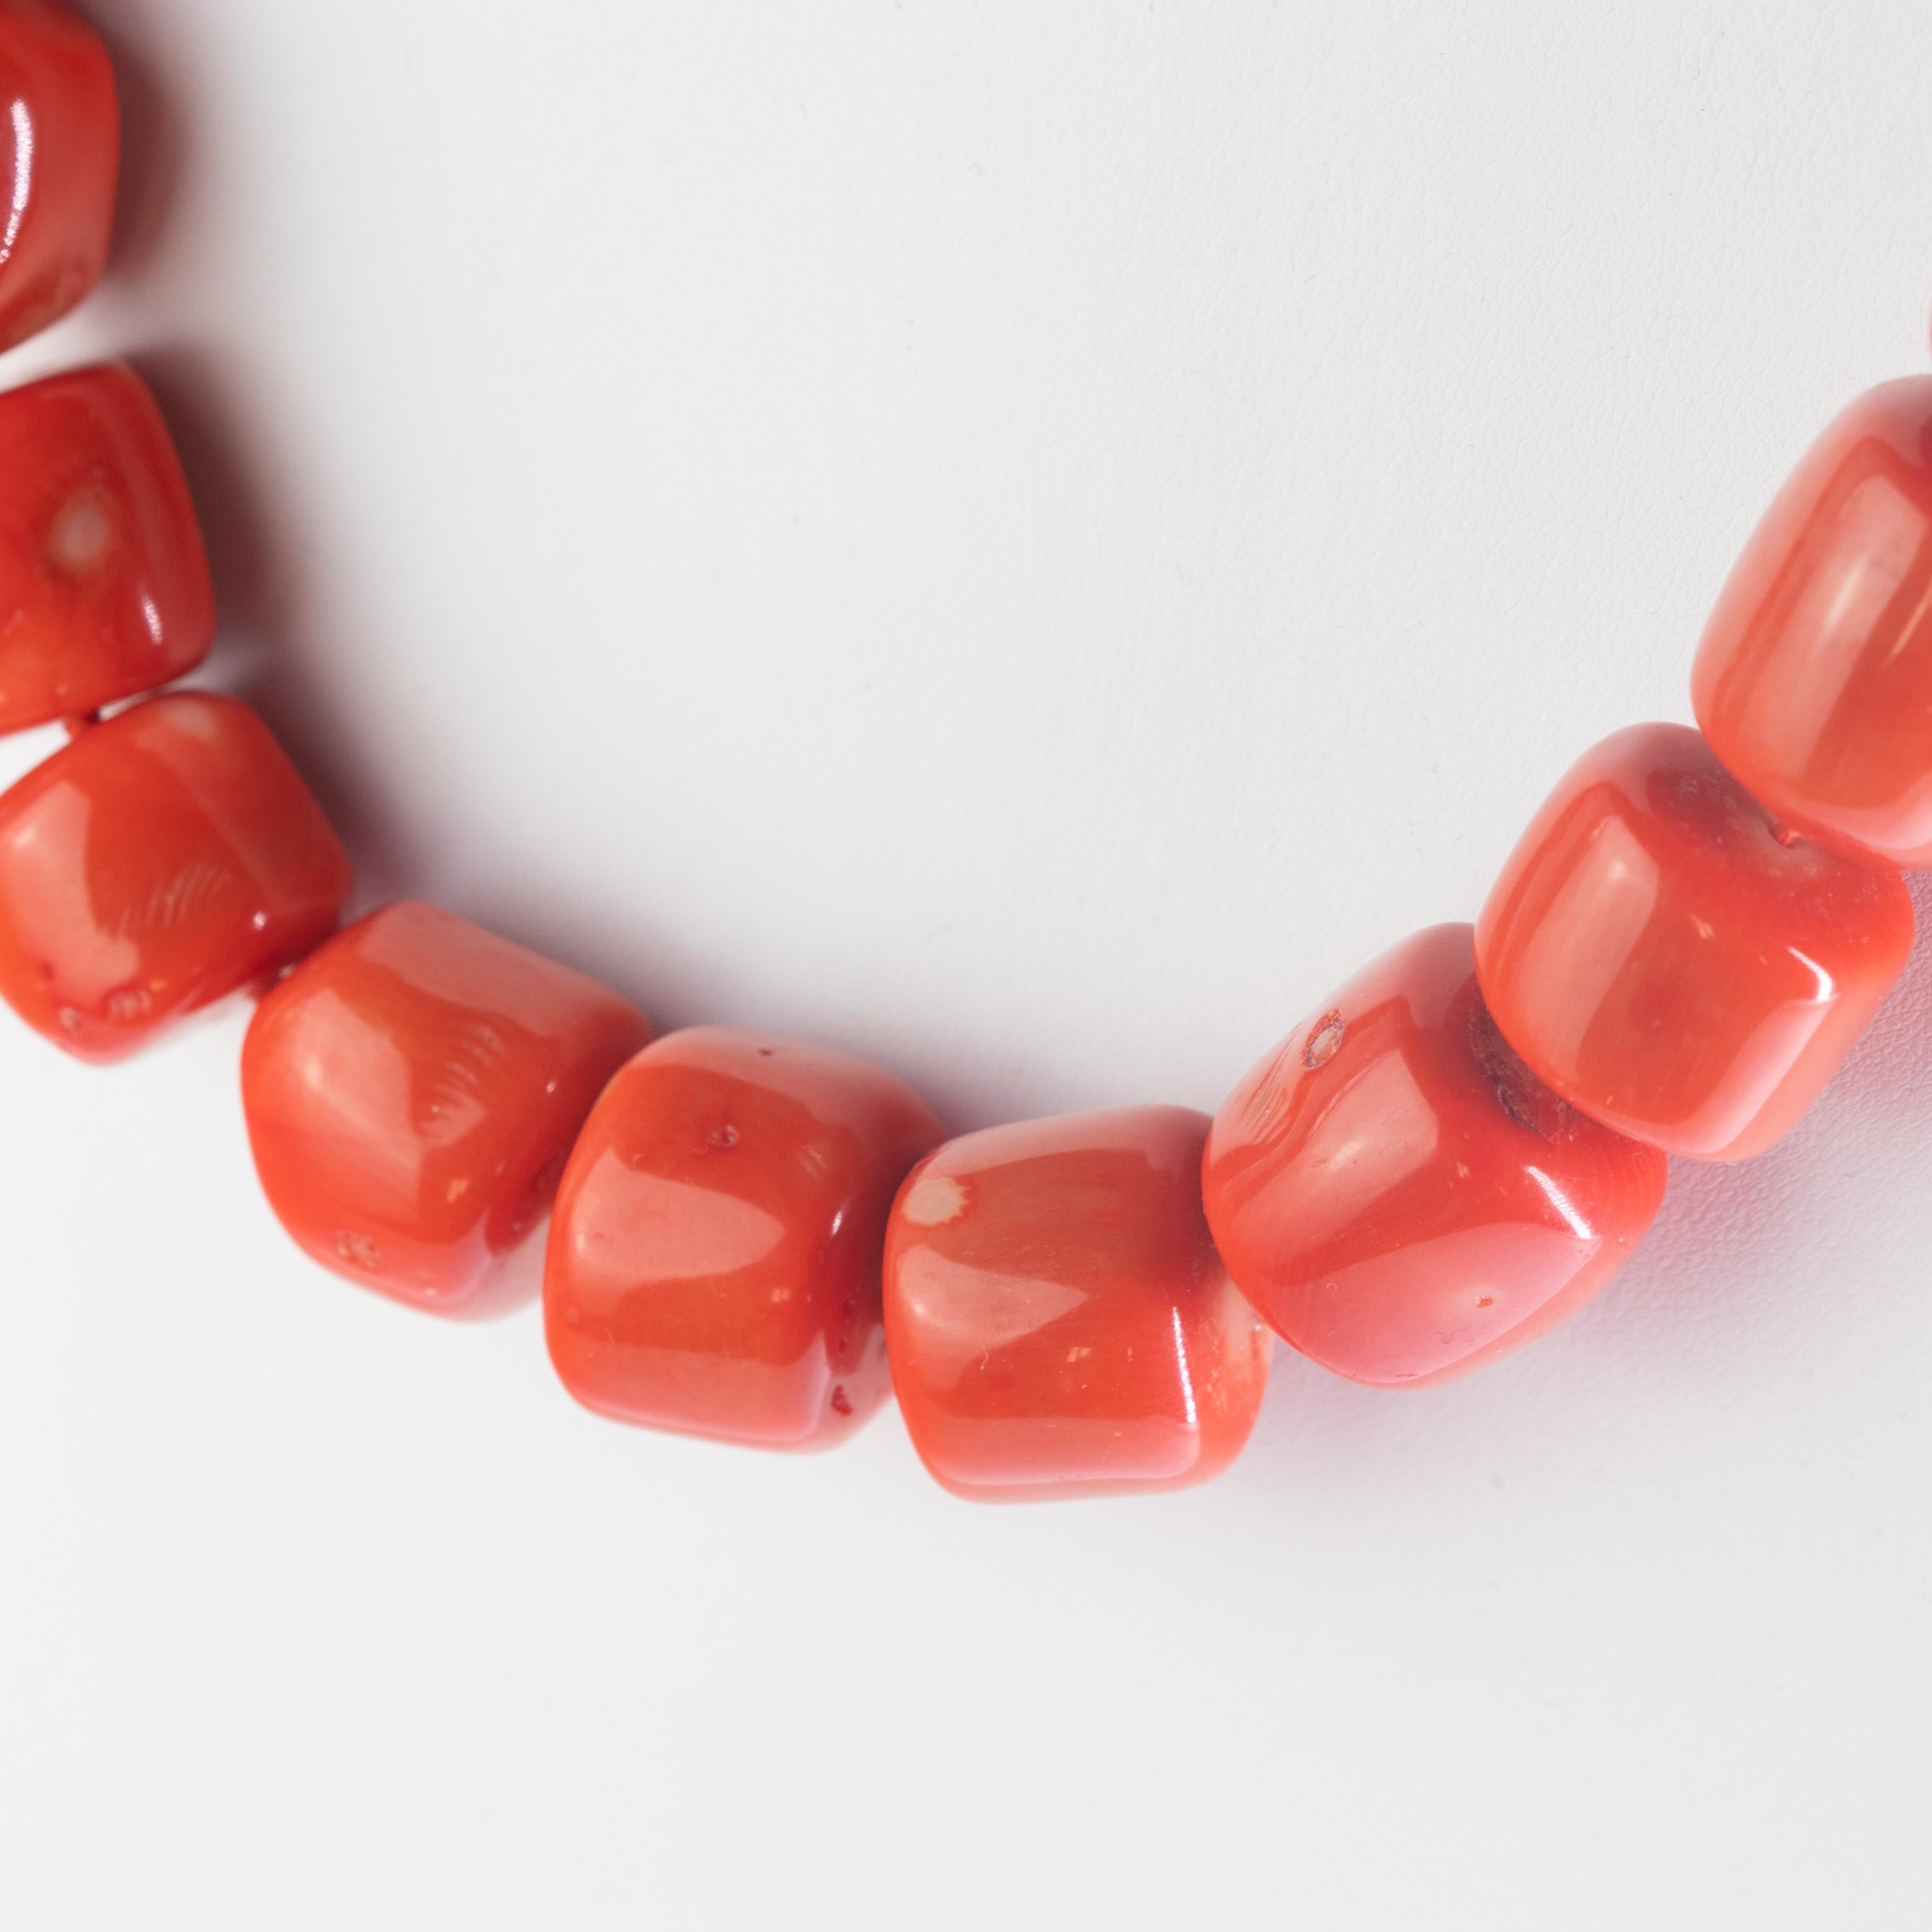 This modern and fashionable red bamboo coral necklace is inspired in a soft summer look. For a fearless and elegant woman not afraid of color and uniqueness. With a touch of modernity and natural bright through 44 coral beads shapped as unequal